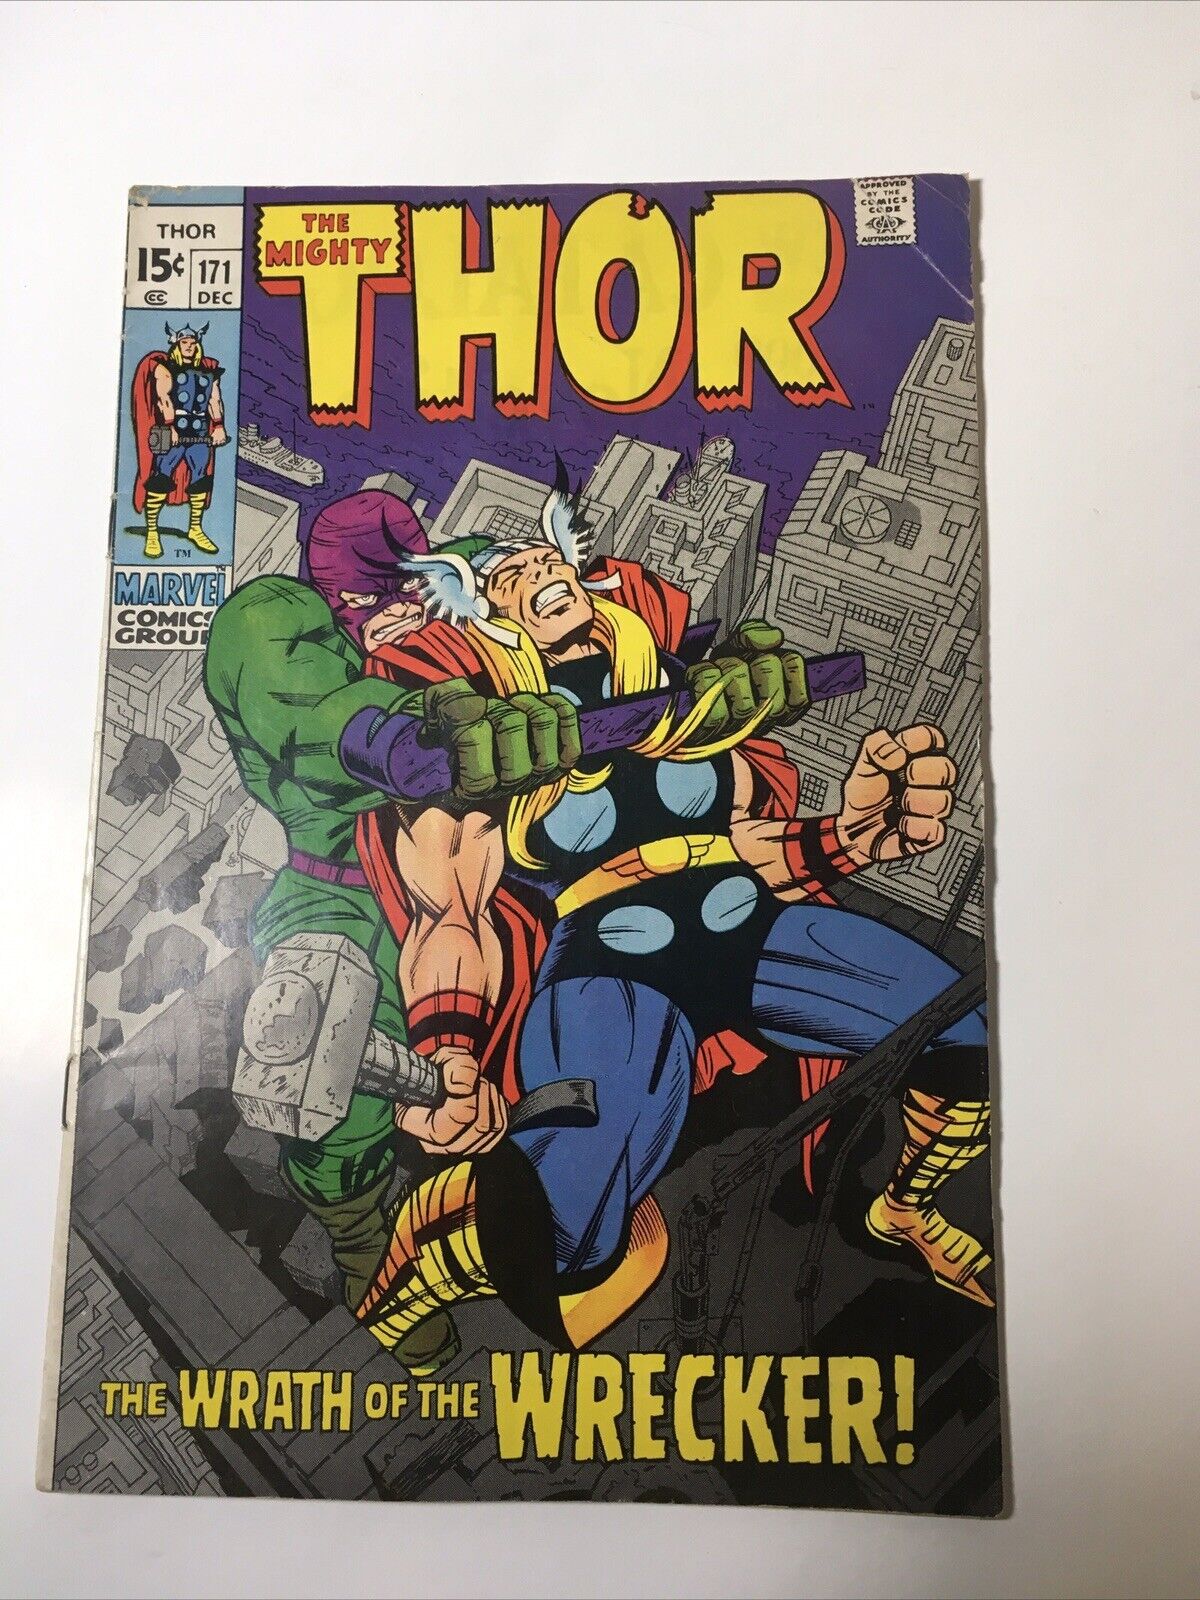 The Mighty Thor #171 The Wrath of the Wrecker! Lee & Kirby Marvel Comics 1969